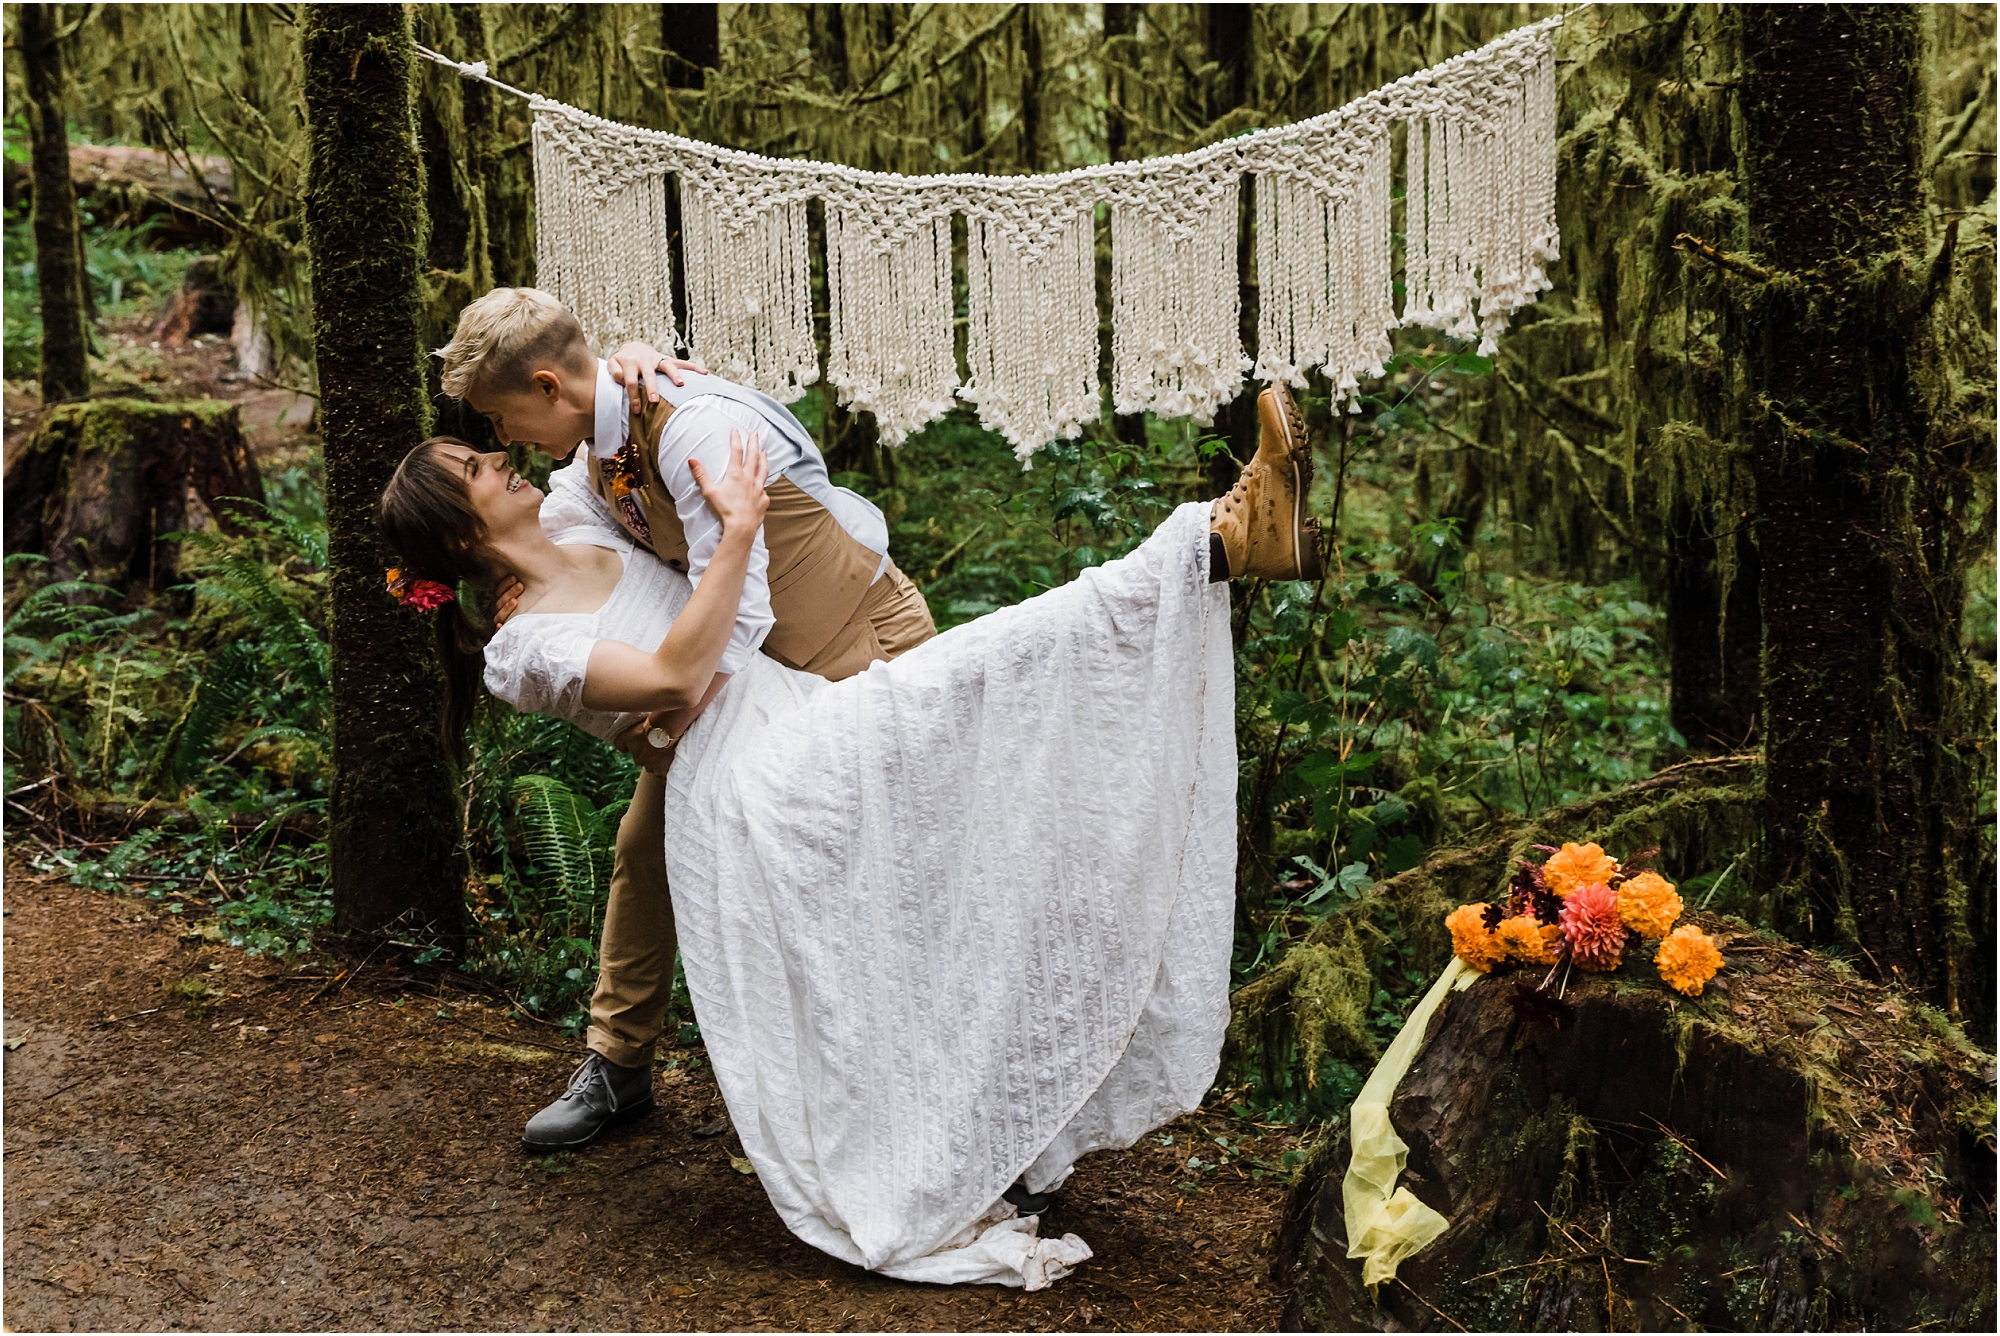 A bride gets a dip from her partner at her PNW hiking adventure elopement along the Drift Creek Falls trail in Oregon. | Erica Swantek Photography